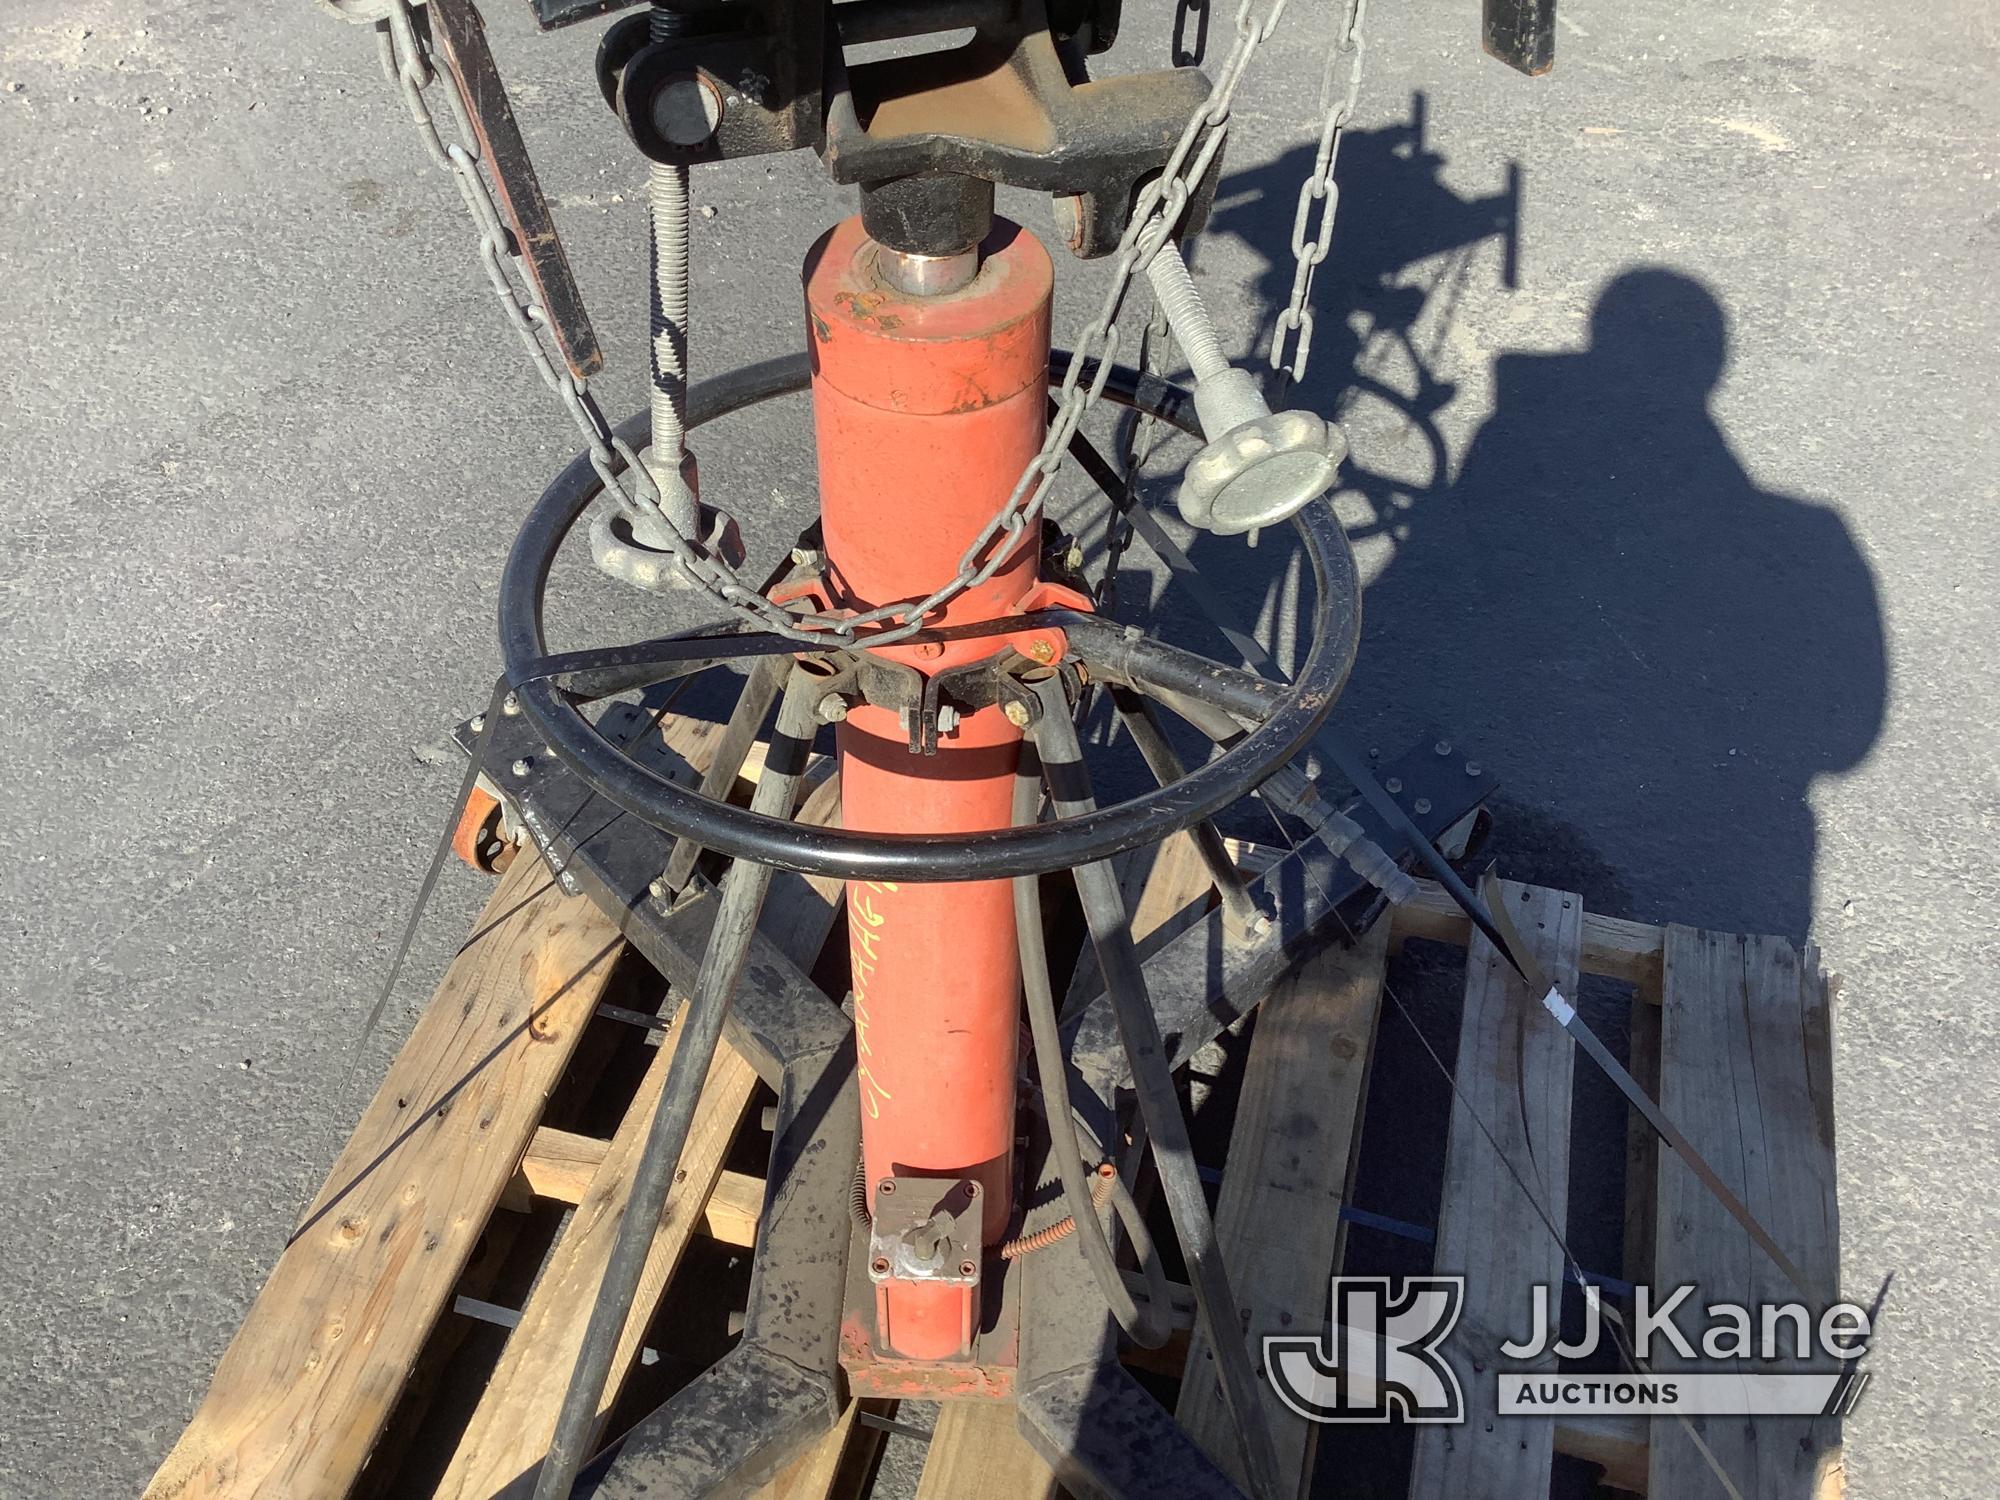 (Jurupa Valley, CA) 1 Transmission Jack (Used) NOTE: This unit is being sold AS IS/WHERE IS via Time